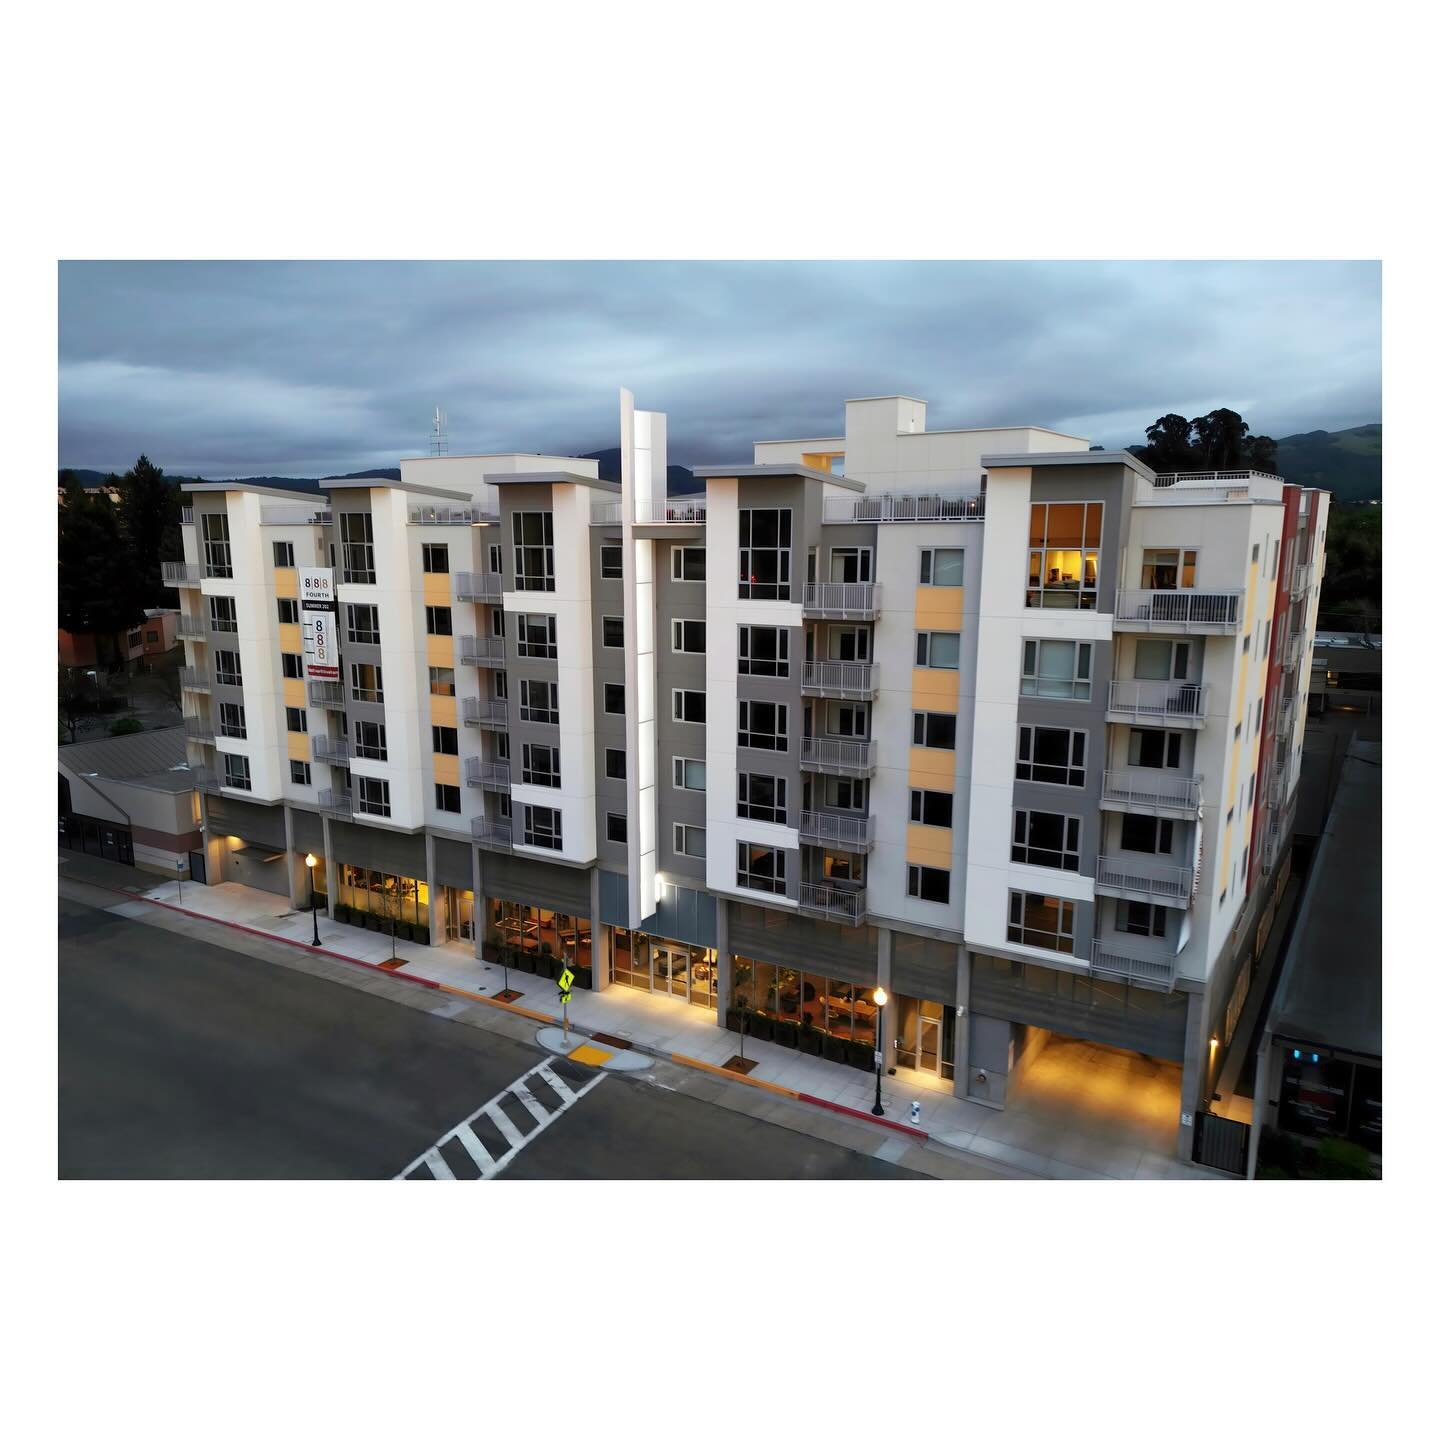 888 Fourth Street shining in Downtown Santa Rosa ✨

The eye catching building is the first high-rise structure to be introduced to downtown Santa Rosa in several decades. The seven-story mixed-use building includes 97 apartment units, a ground floor 